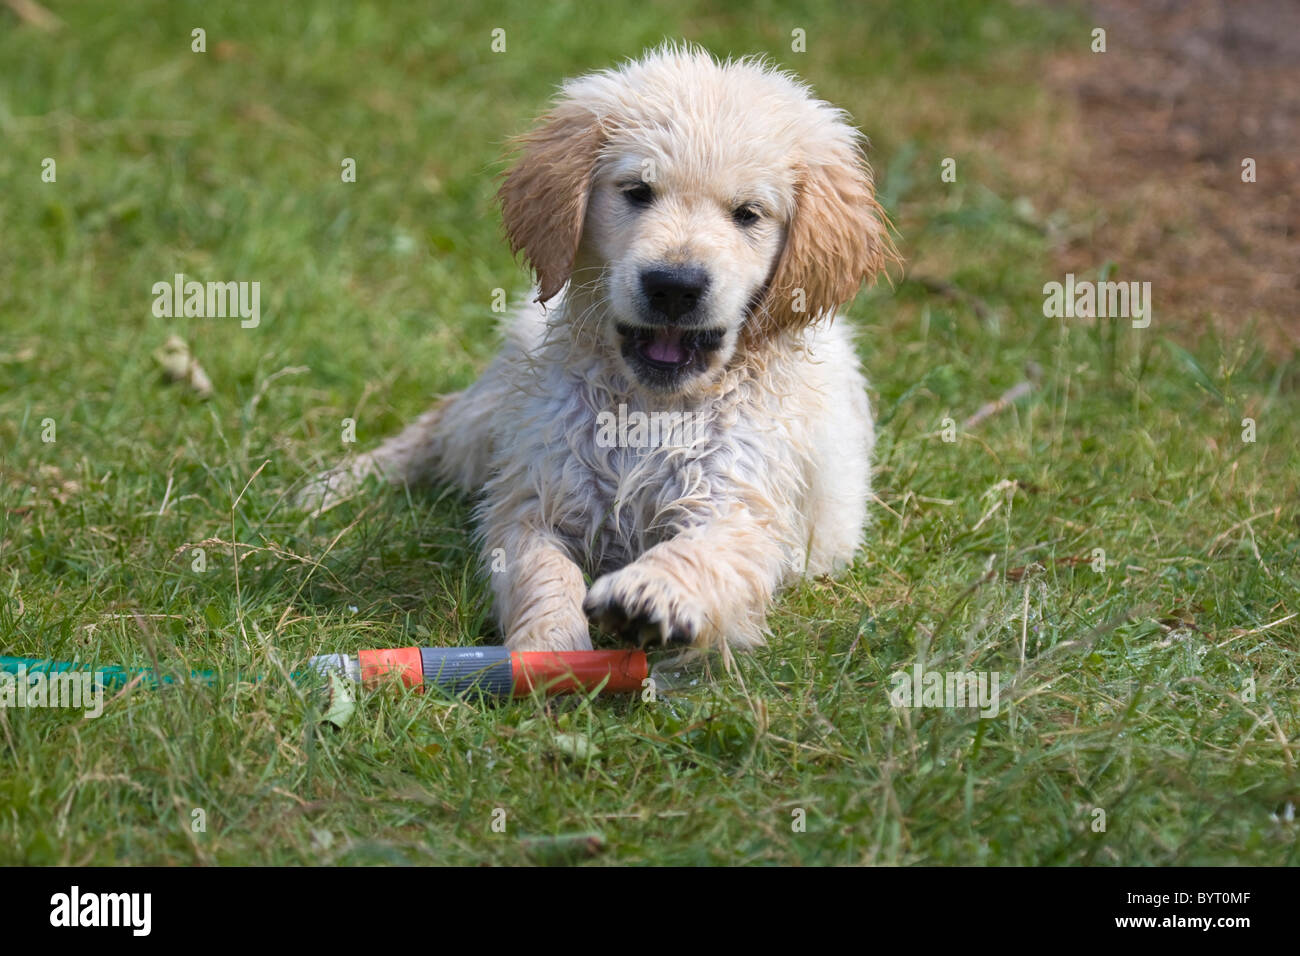 Wet Golden Retriever puppy plays with a hosepipe Stock Photo